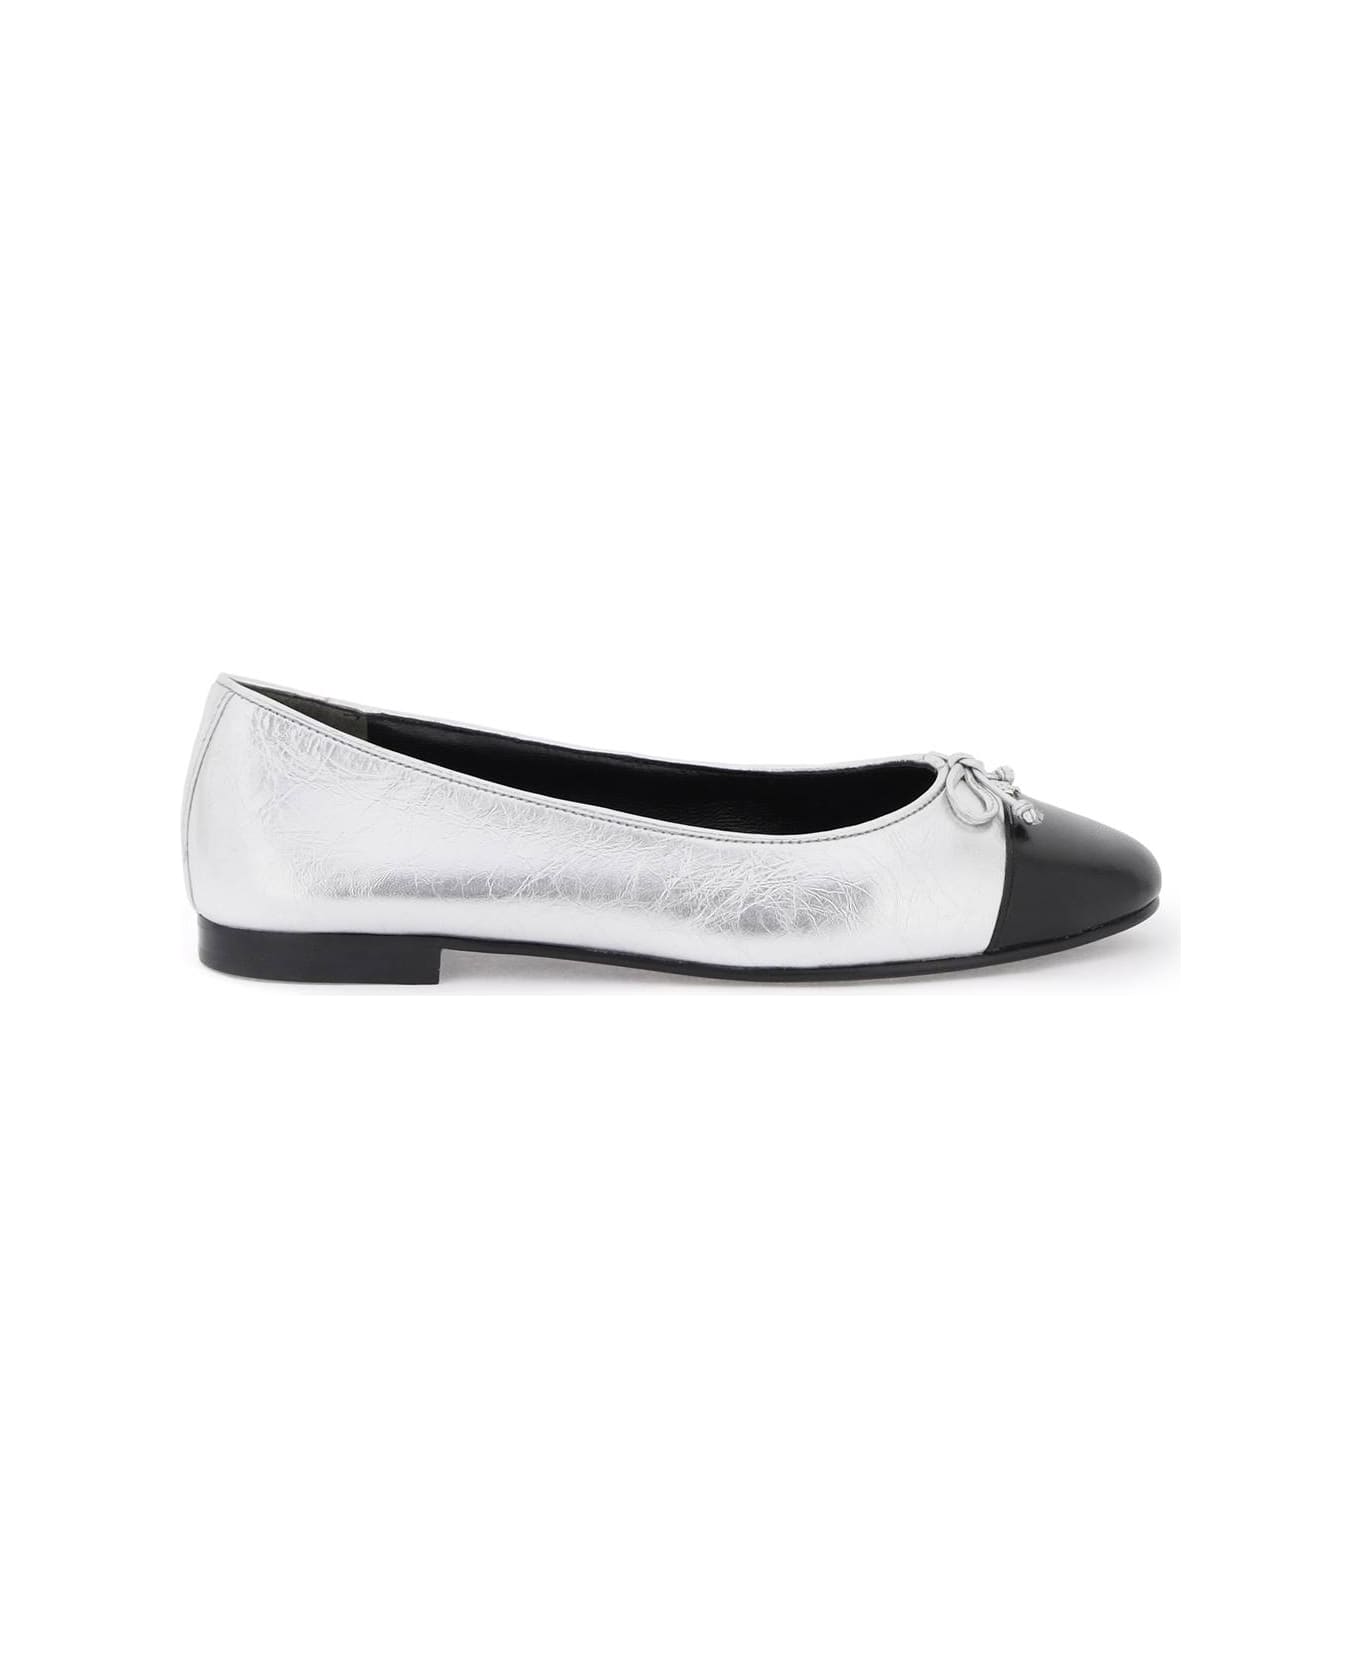 Tory Burch Laminated Ballet Flats With Contrasting Toe - Silver/Black フラットシューズ